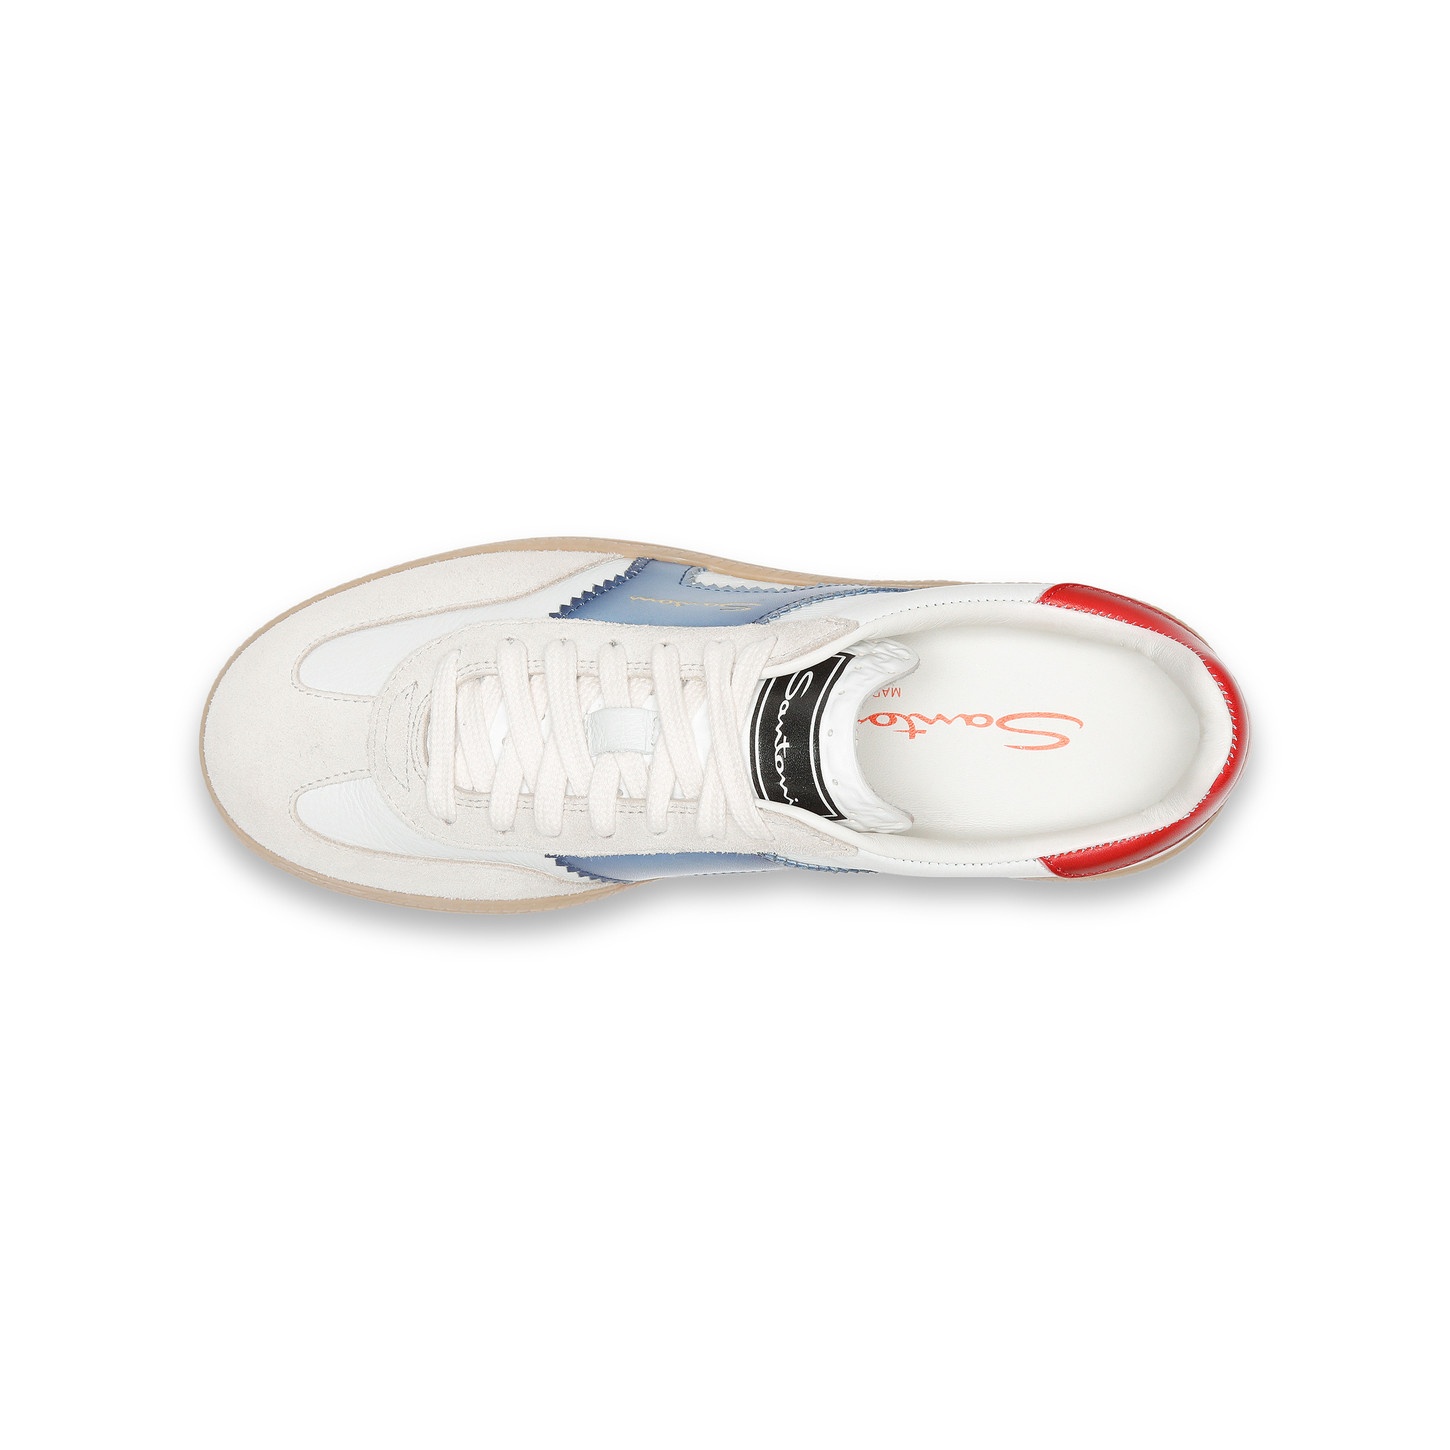 Women's white, blue and red leather and suede DBS Oly sneaker - 5